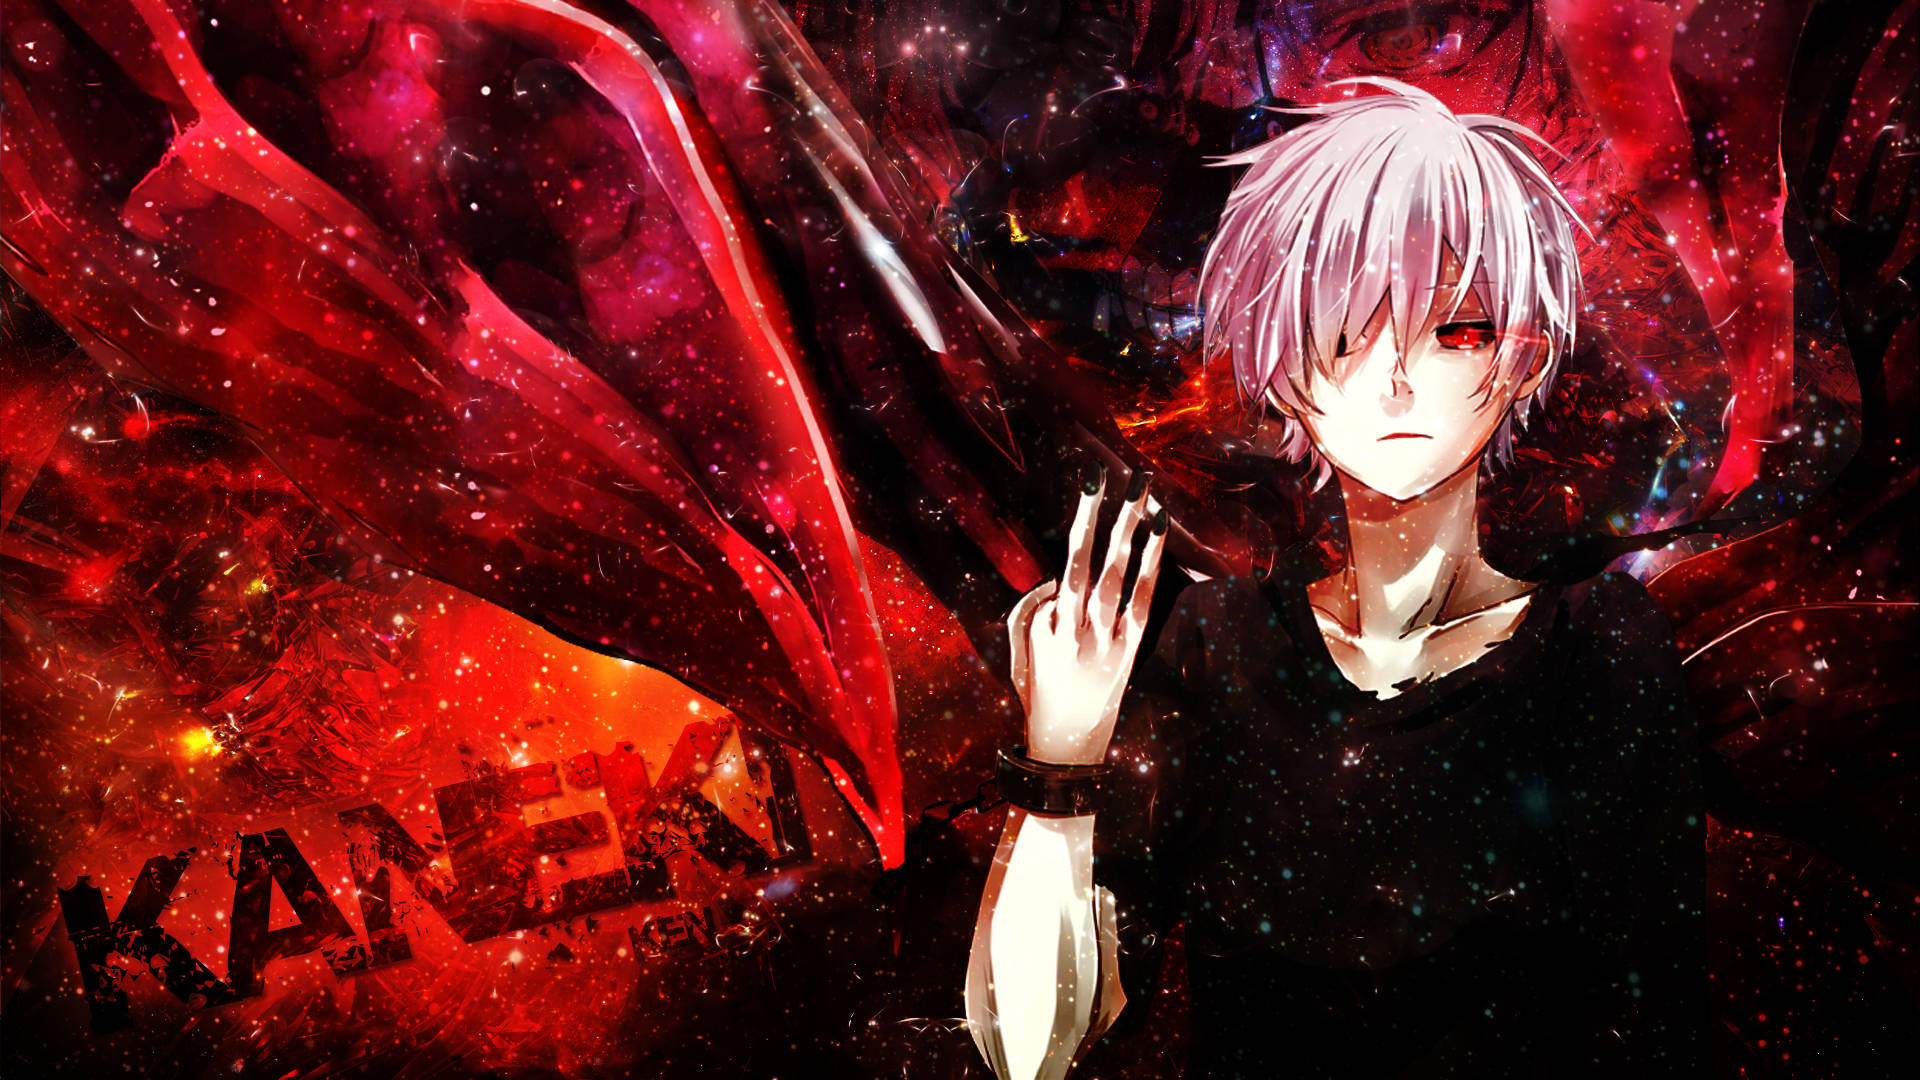 Share 86+ about tokyo ghoul wallpaper super hot .vn